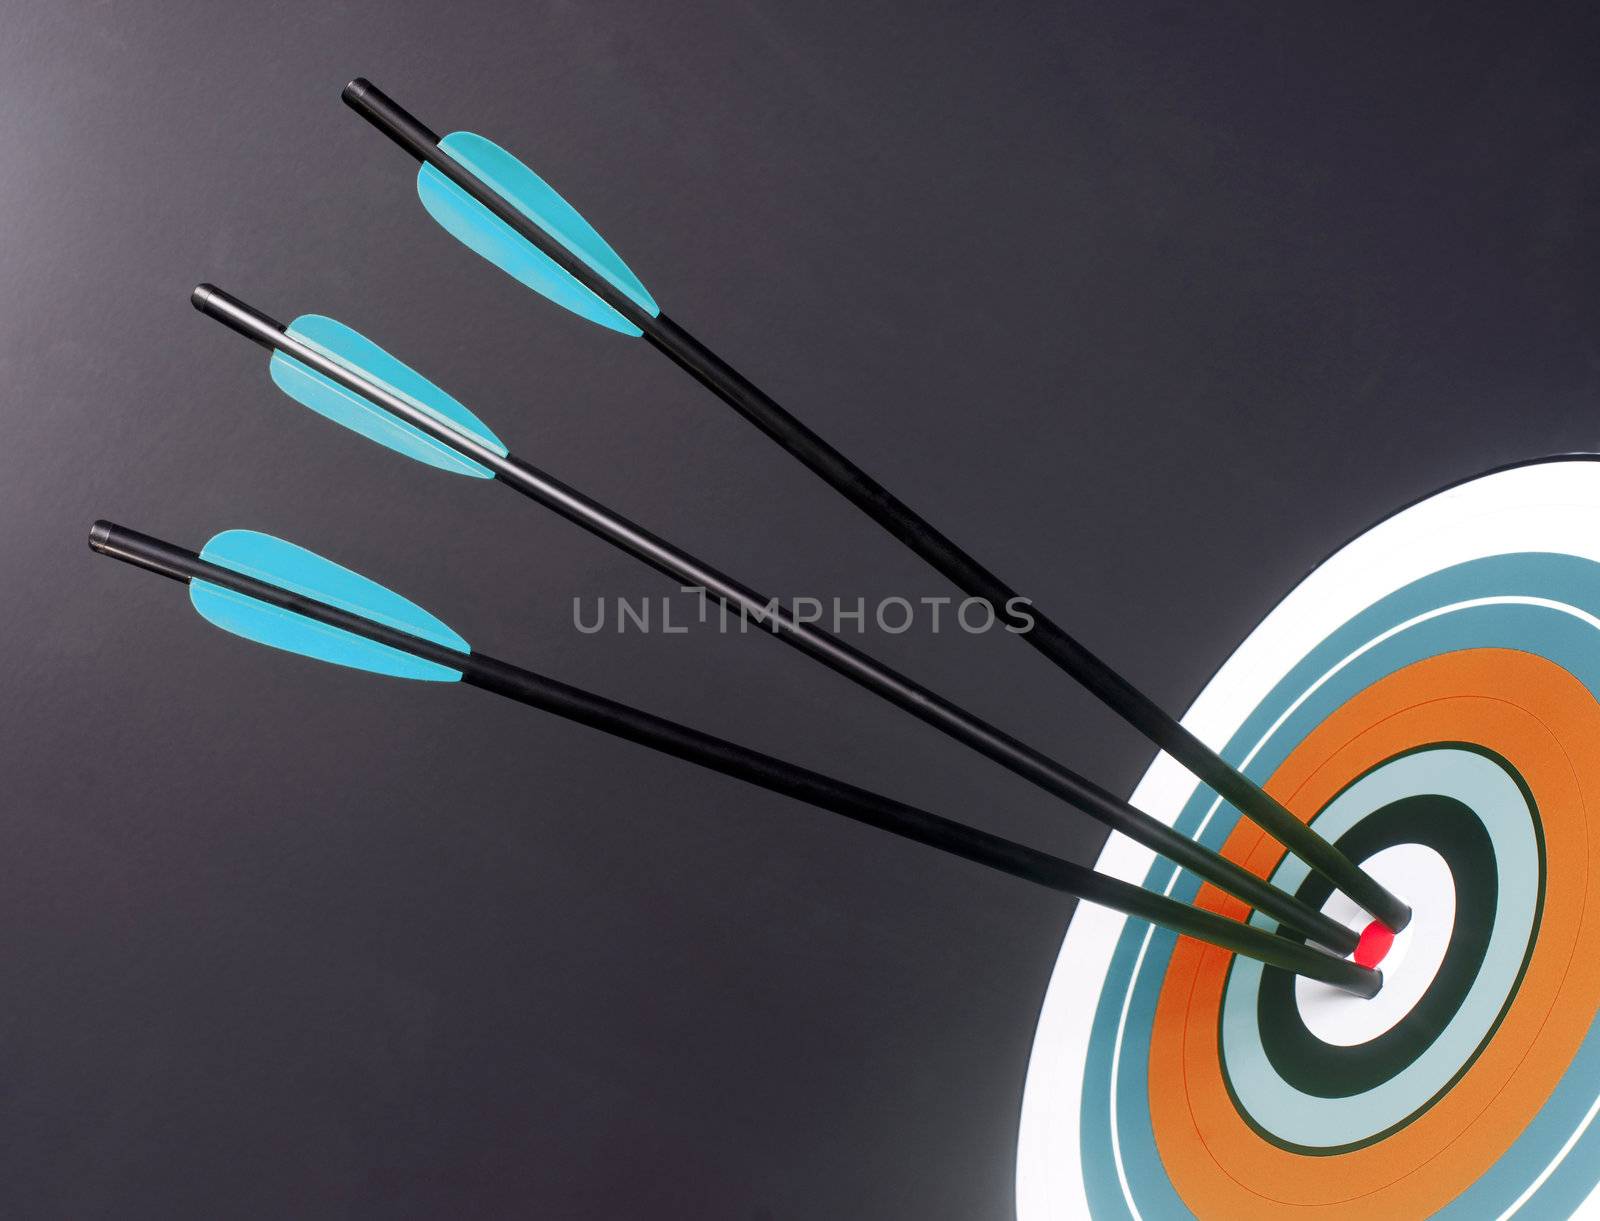 Three Green and Black Archery Arrows Hit Round Multi Colored Target Bullseye Center